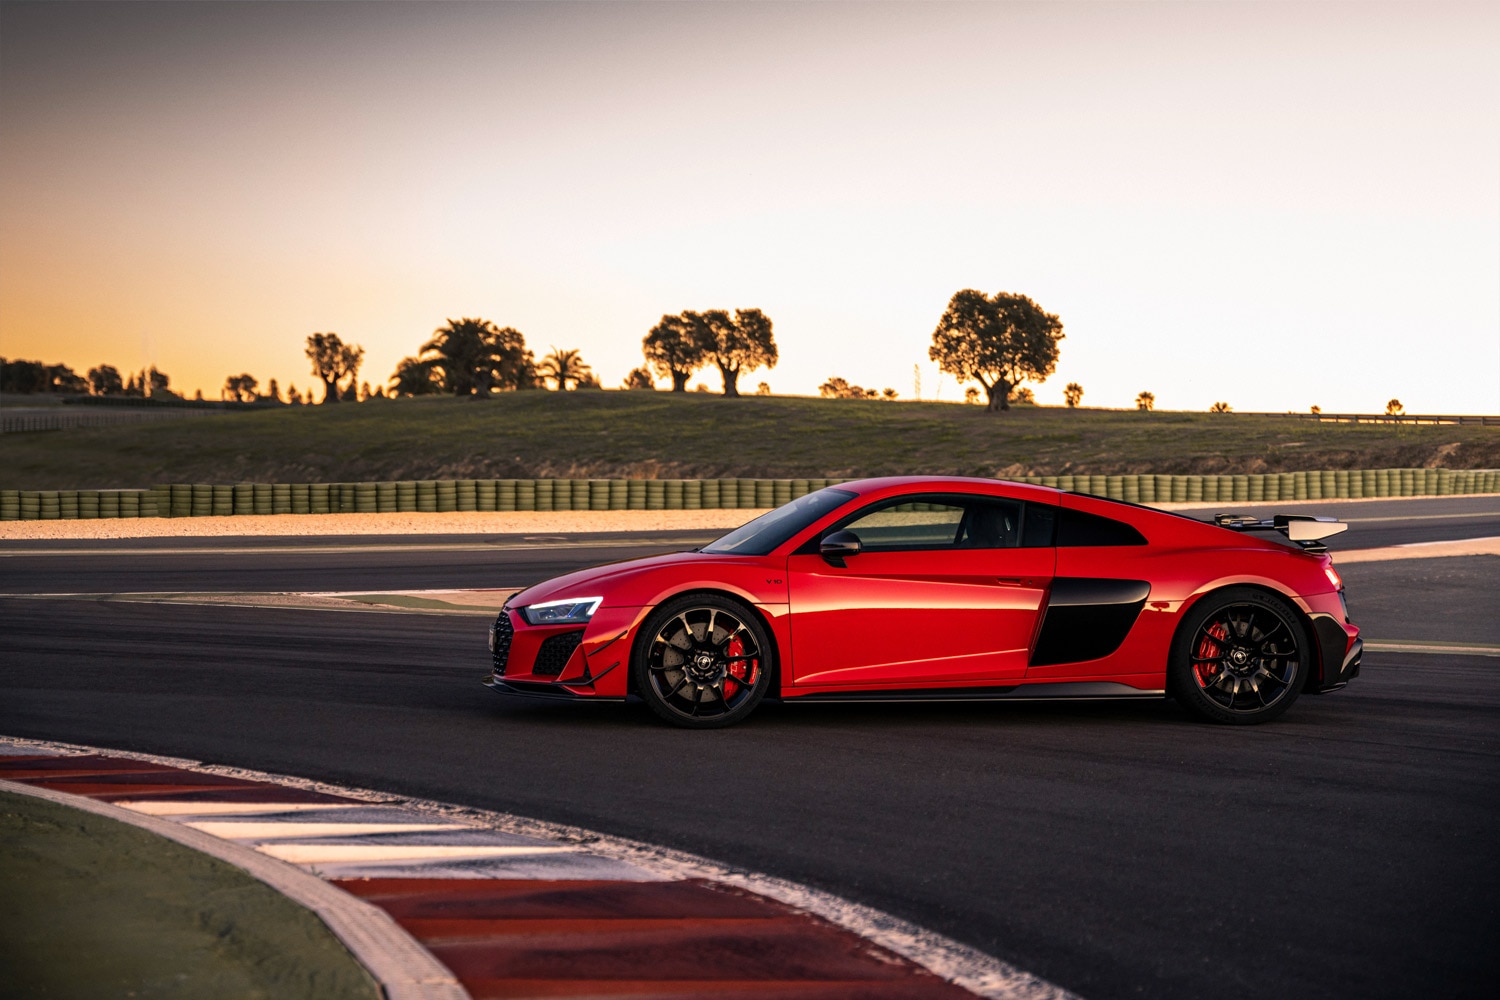 Side view of a red Audi R8 GT